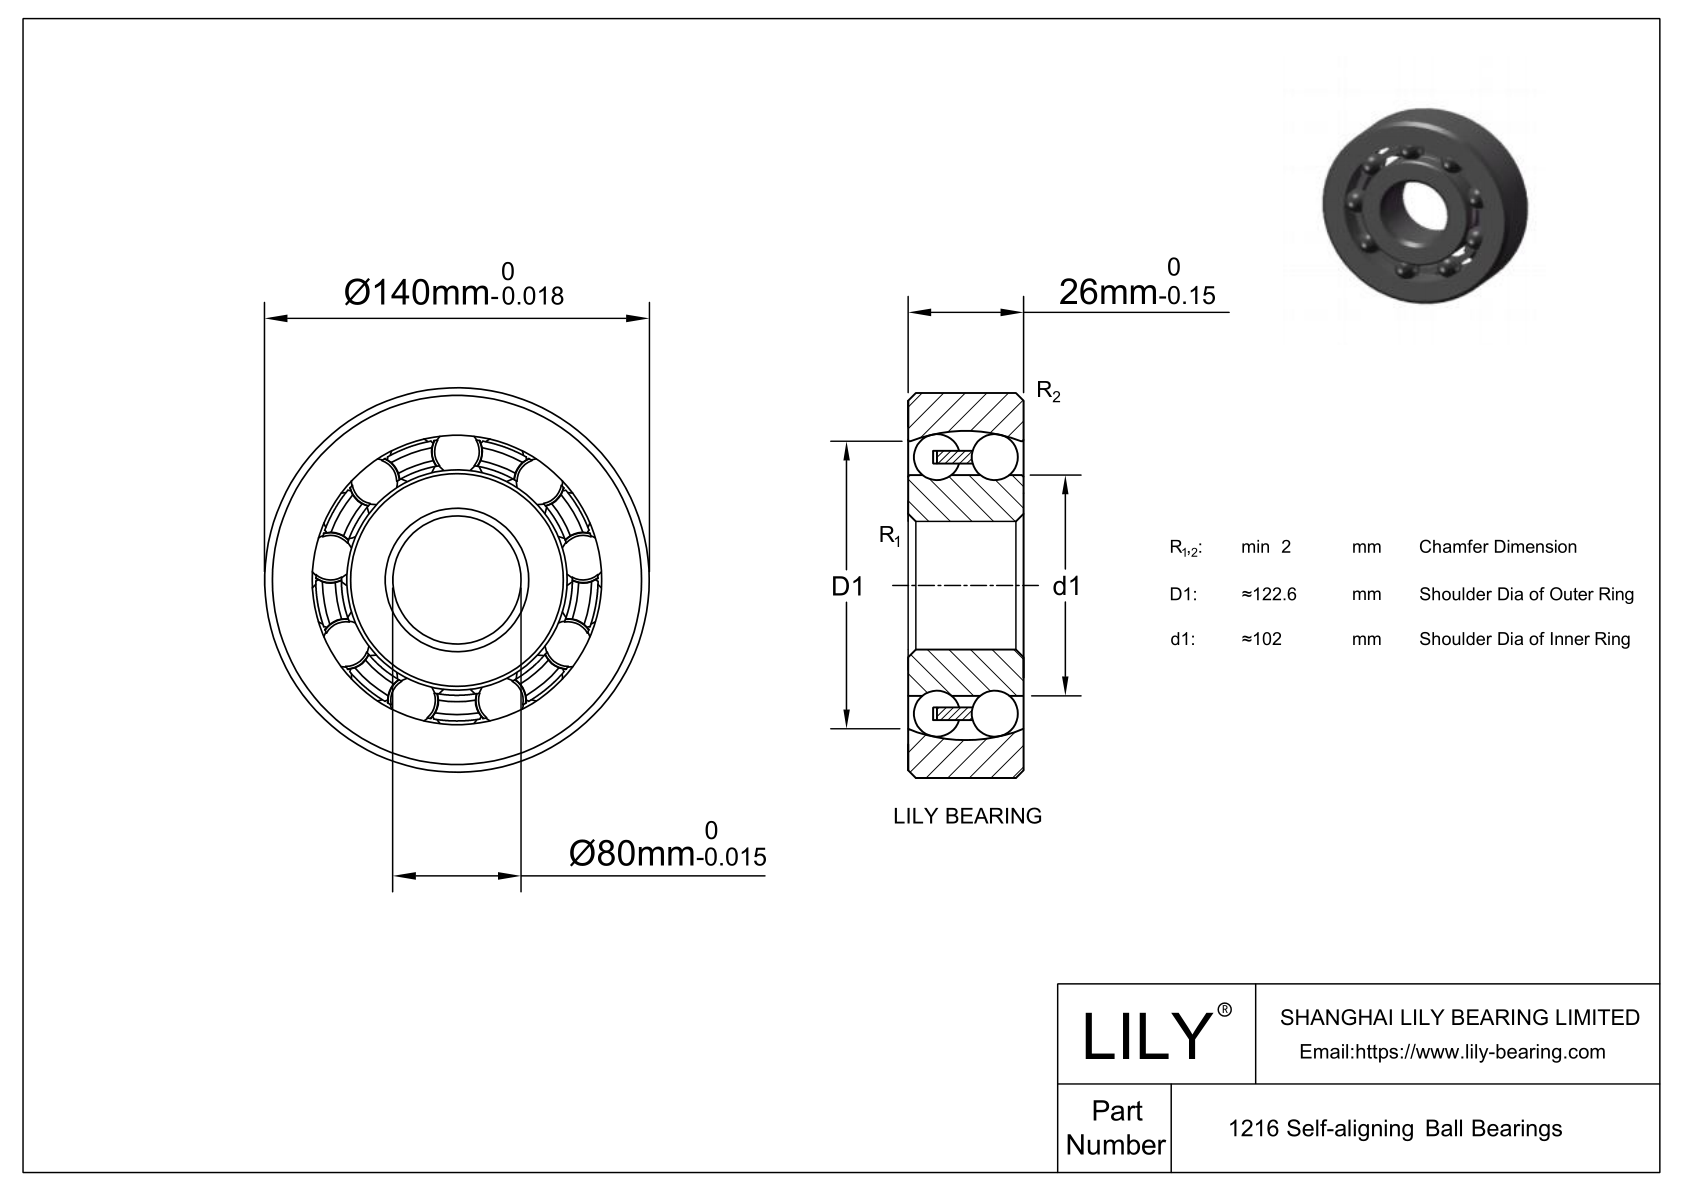 S1216 Stainless Steel Self Aligning Ball Bearings cad drawing